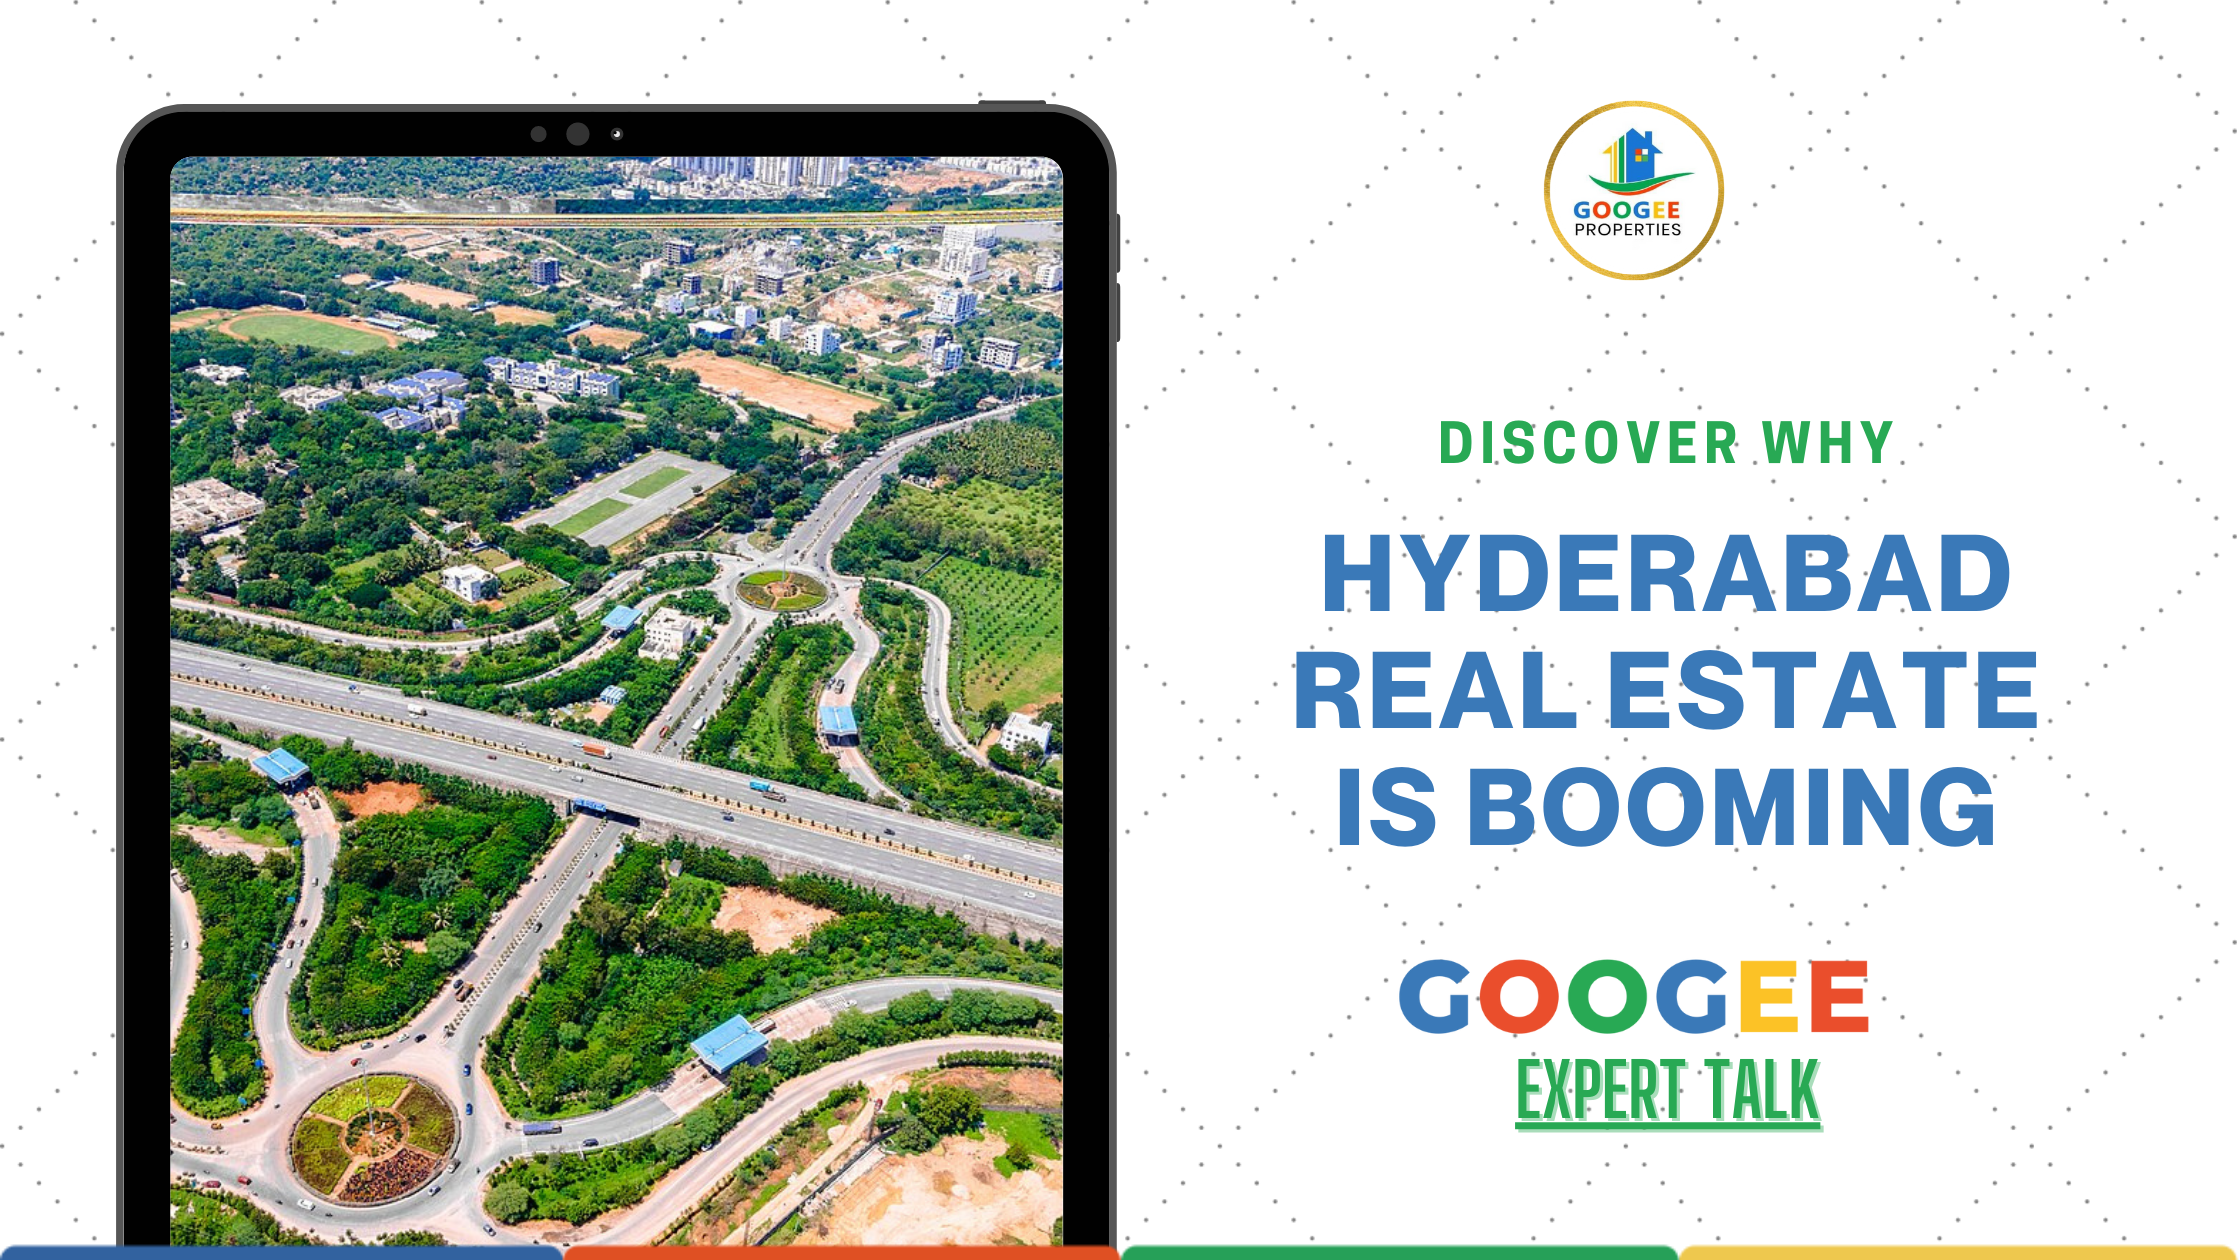 WHY IS HYDERABAD REAL ESTATE BOOMING?